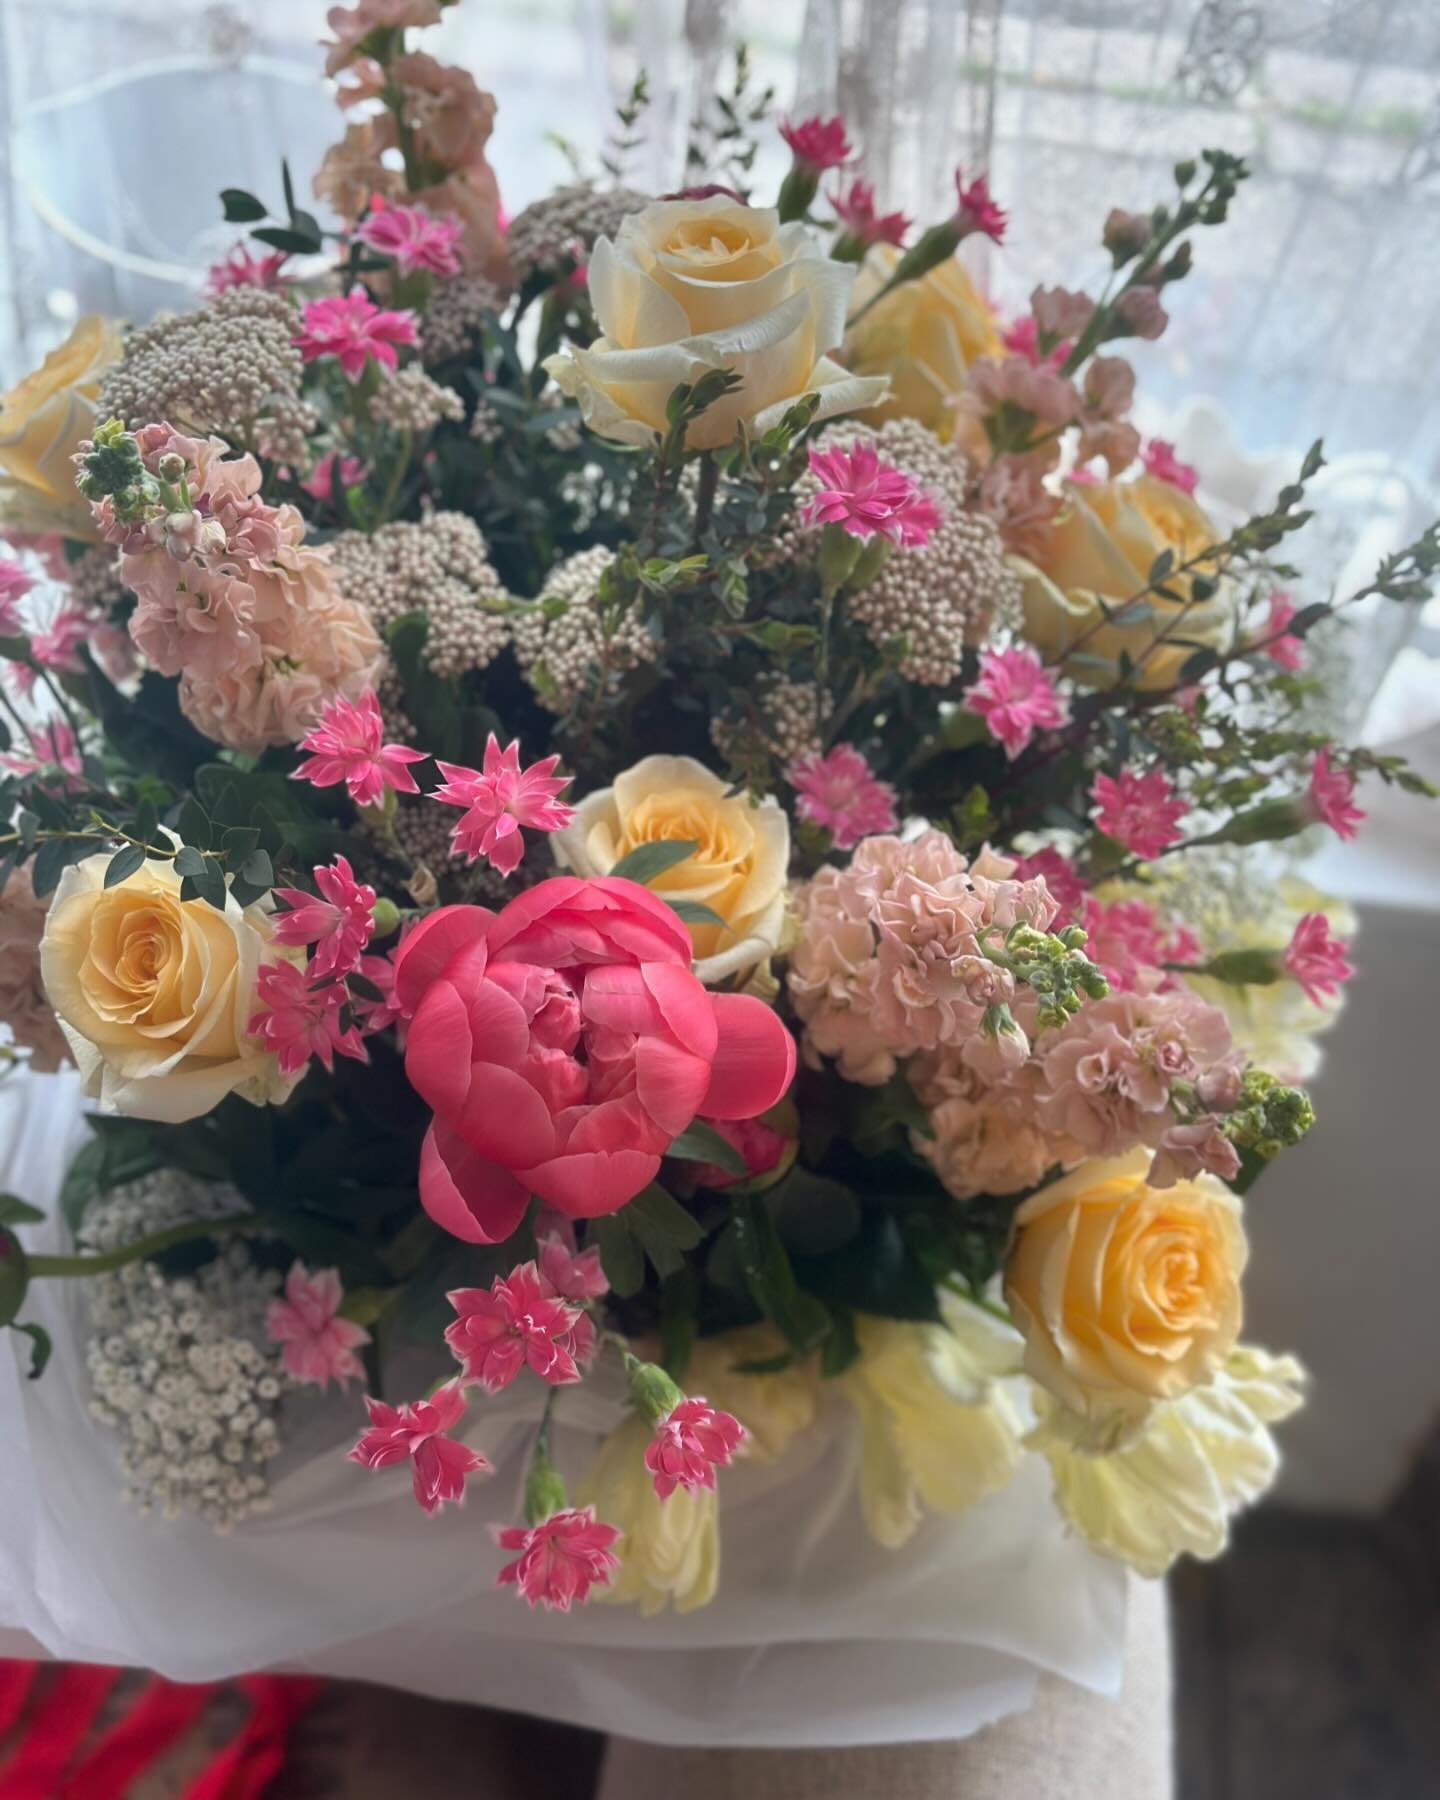 💐Biggest Happy Birthday bouquet by @katelangdaleflorist 

Last few days have been one celebration after another for me! This May has really kicked off with a bang and there&rsquo;s so much to come! Cant wait to share everything with you! 
🎉🥳🙌🏽🤗